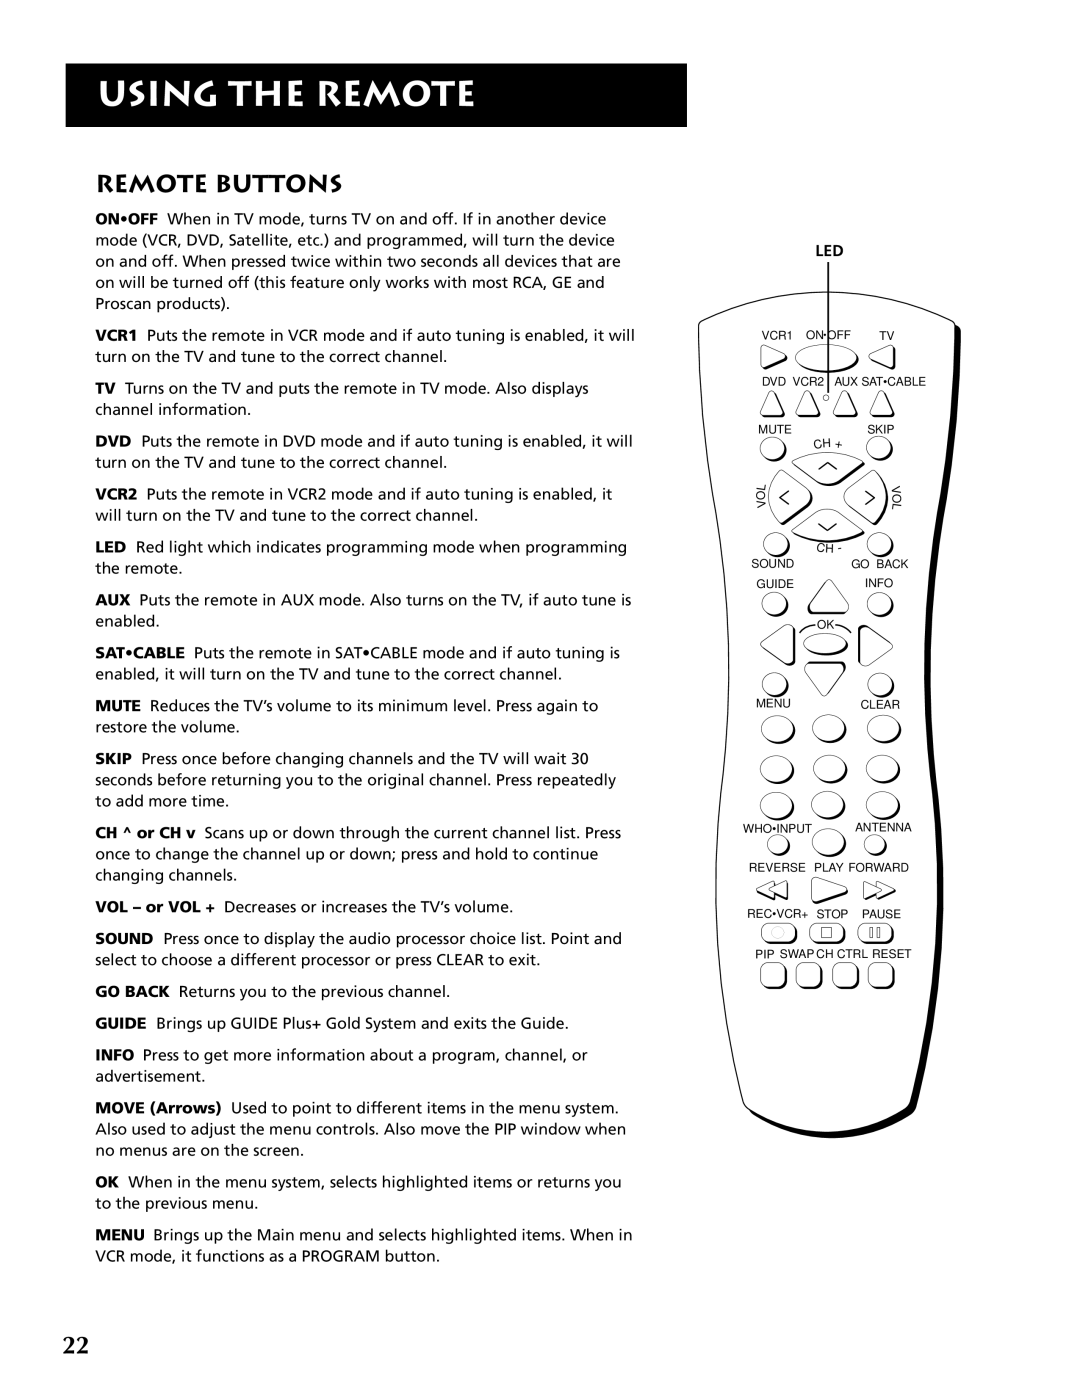 RCA F32691 manual Remote Buttons, Using The Remote 